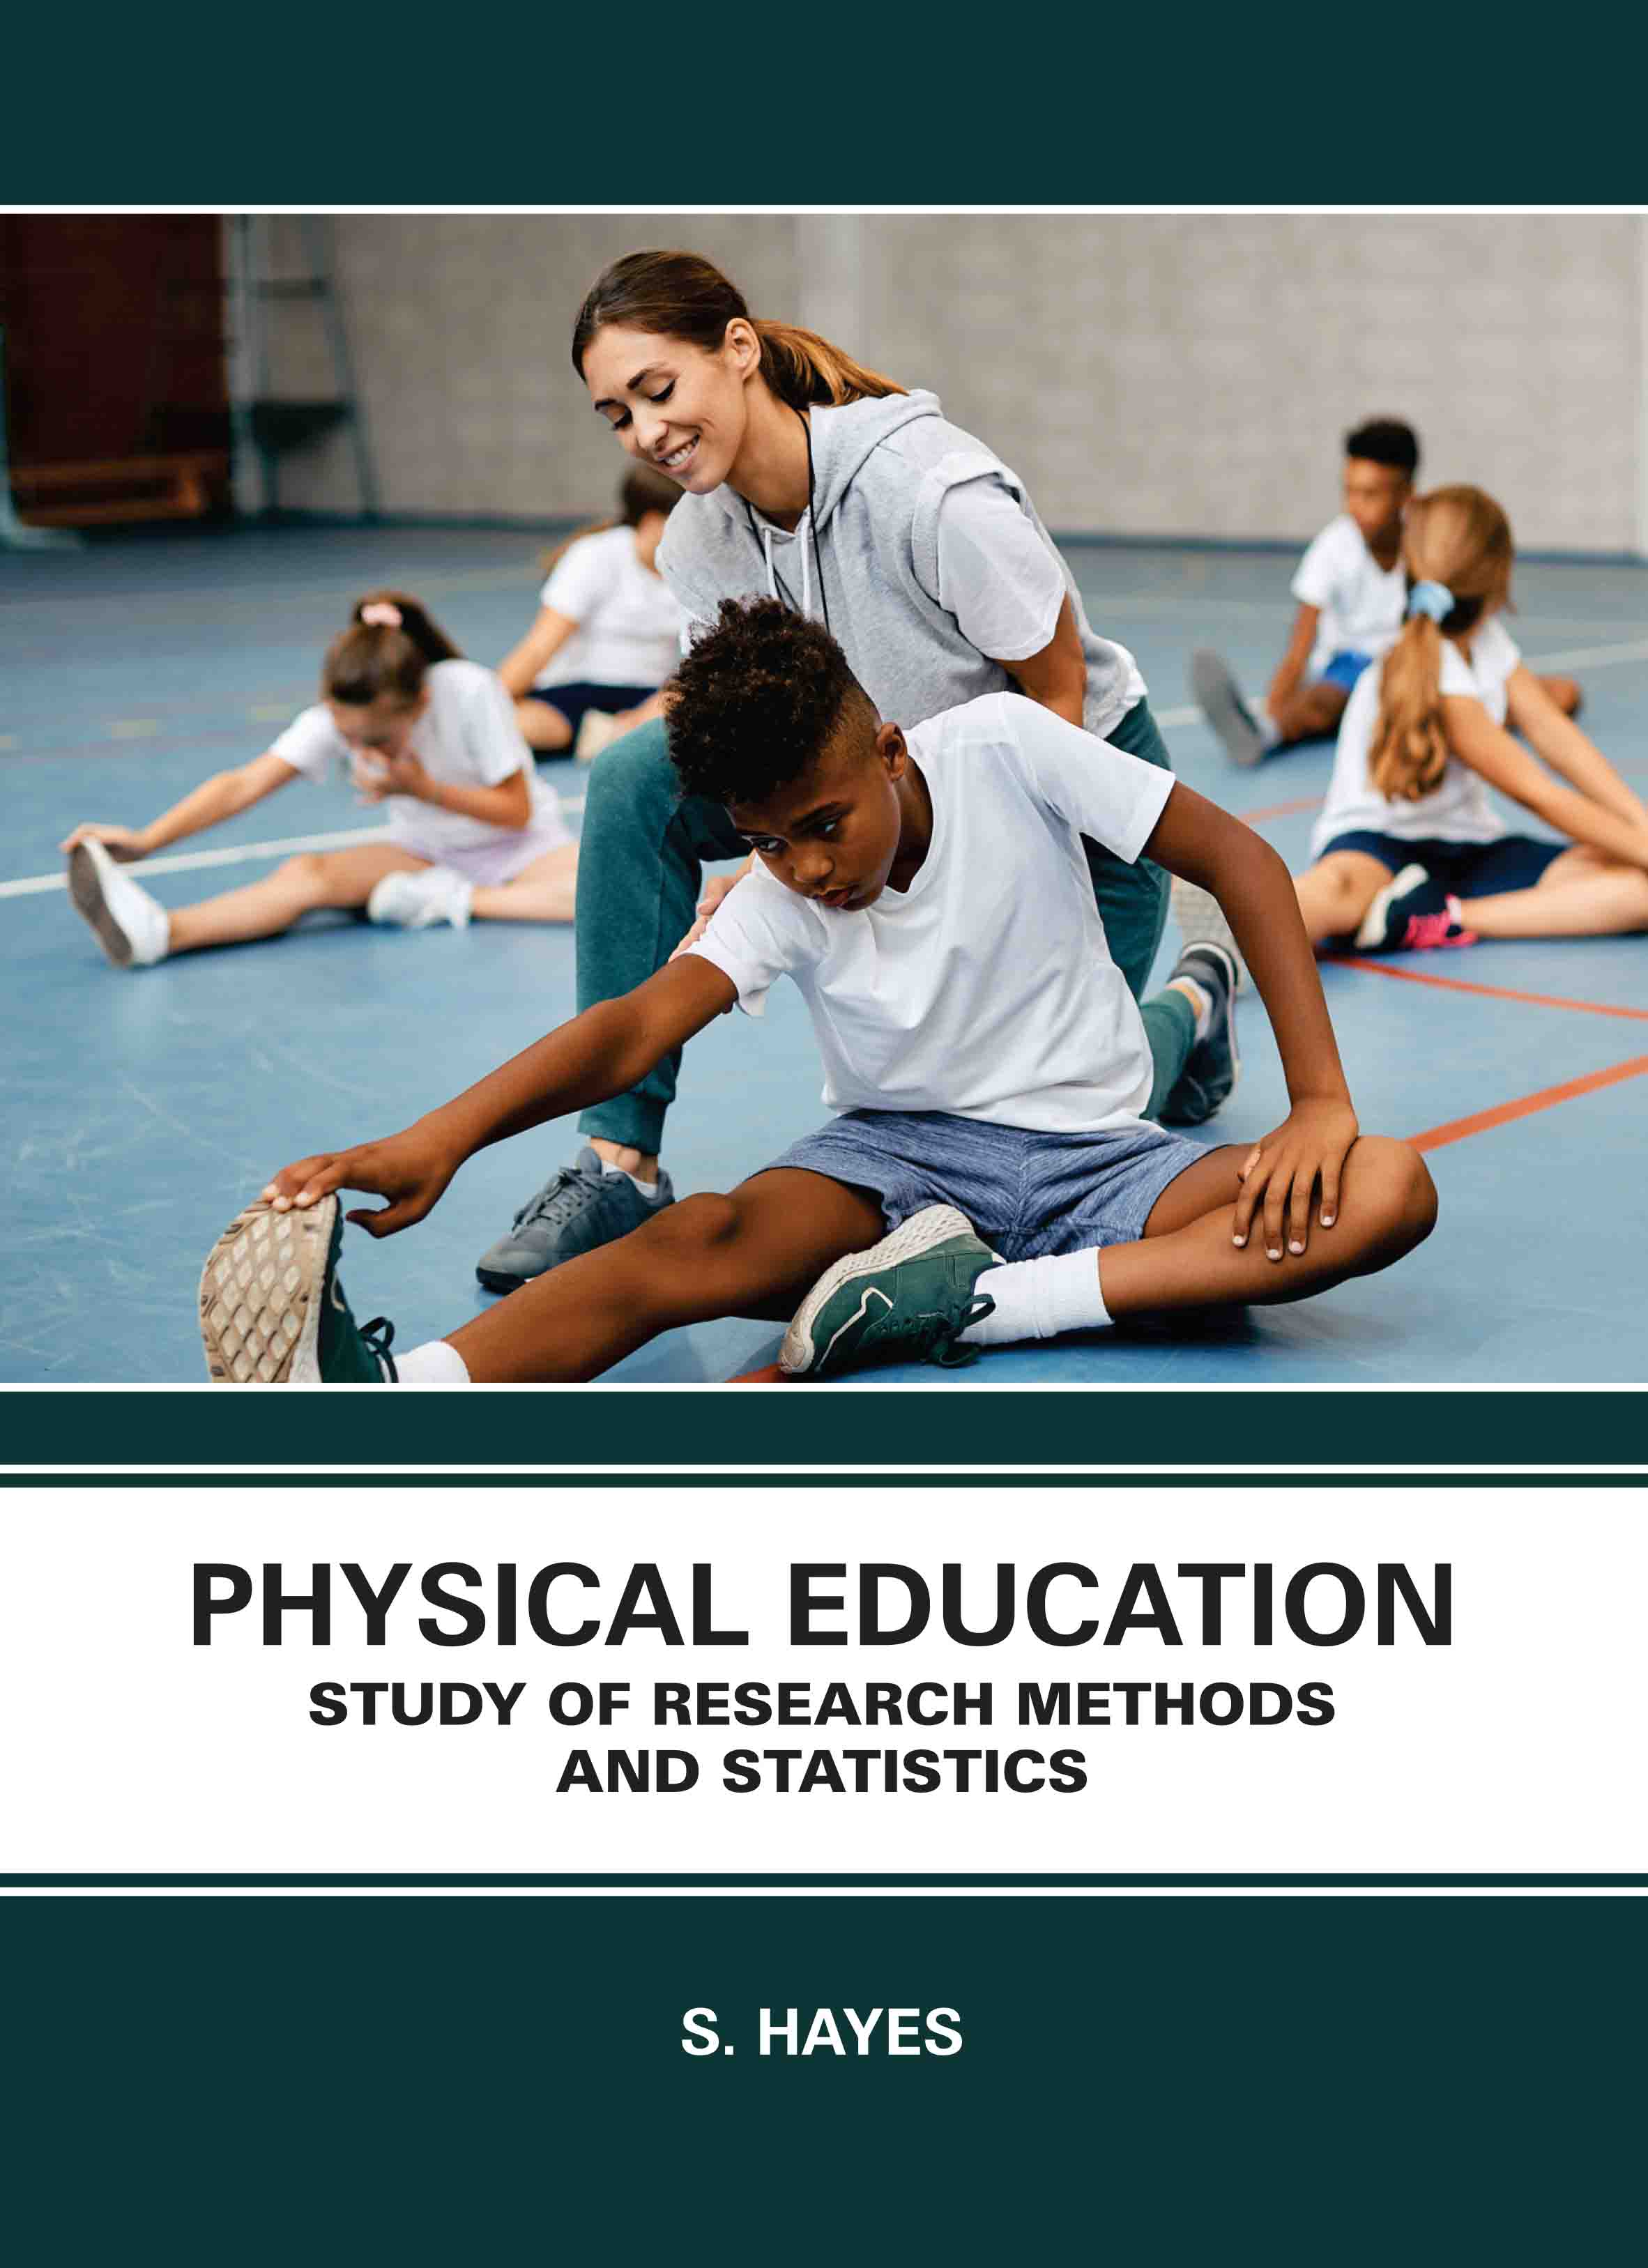 Physical Education: Study of Research Methods and Statistics